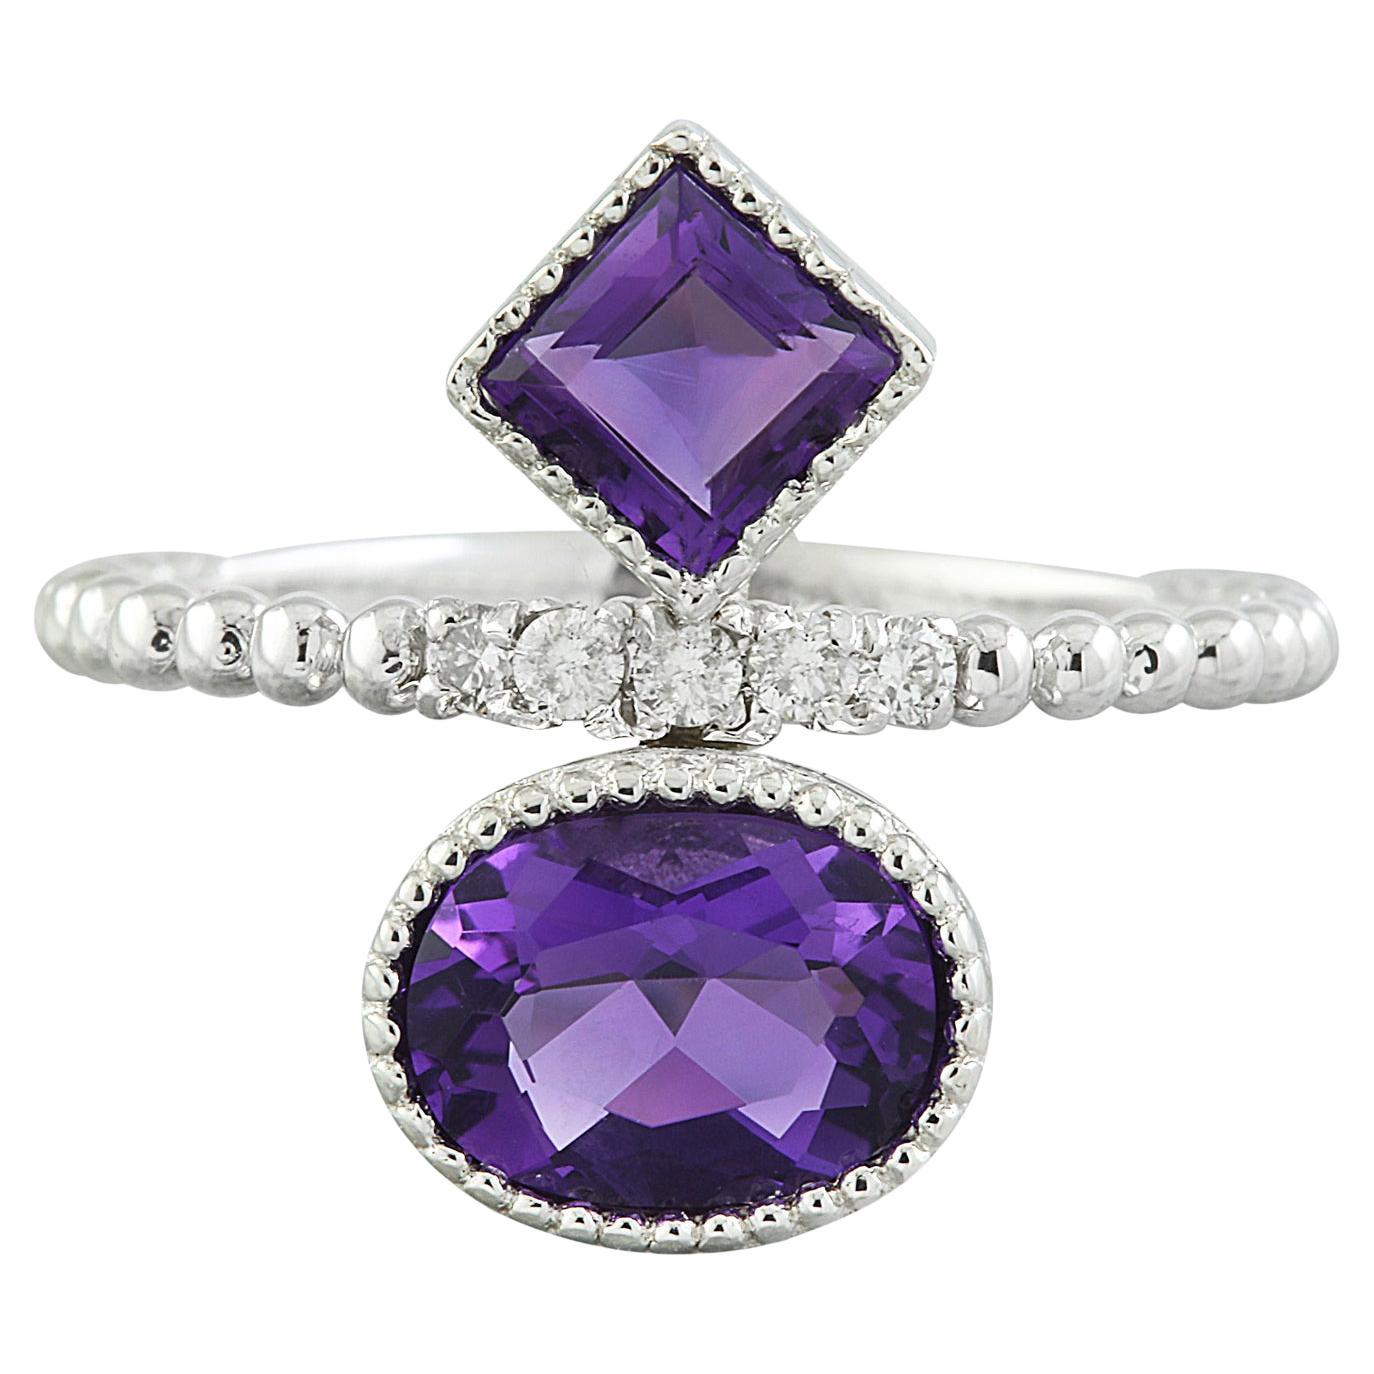 Dazzling Amethyst Diamond Ring: Exquisite Beauty in 14K Solid White Gold